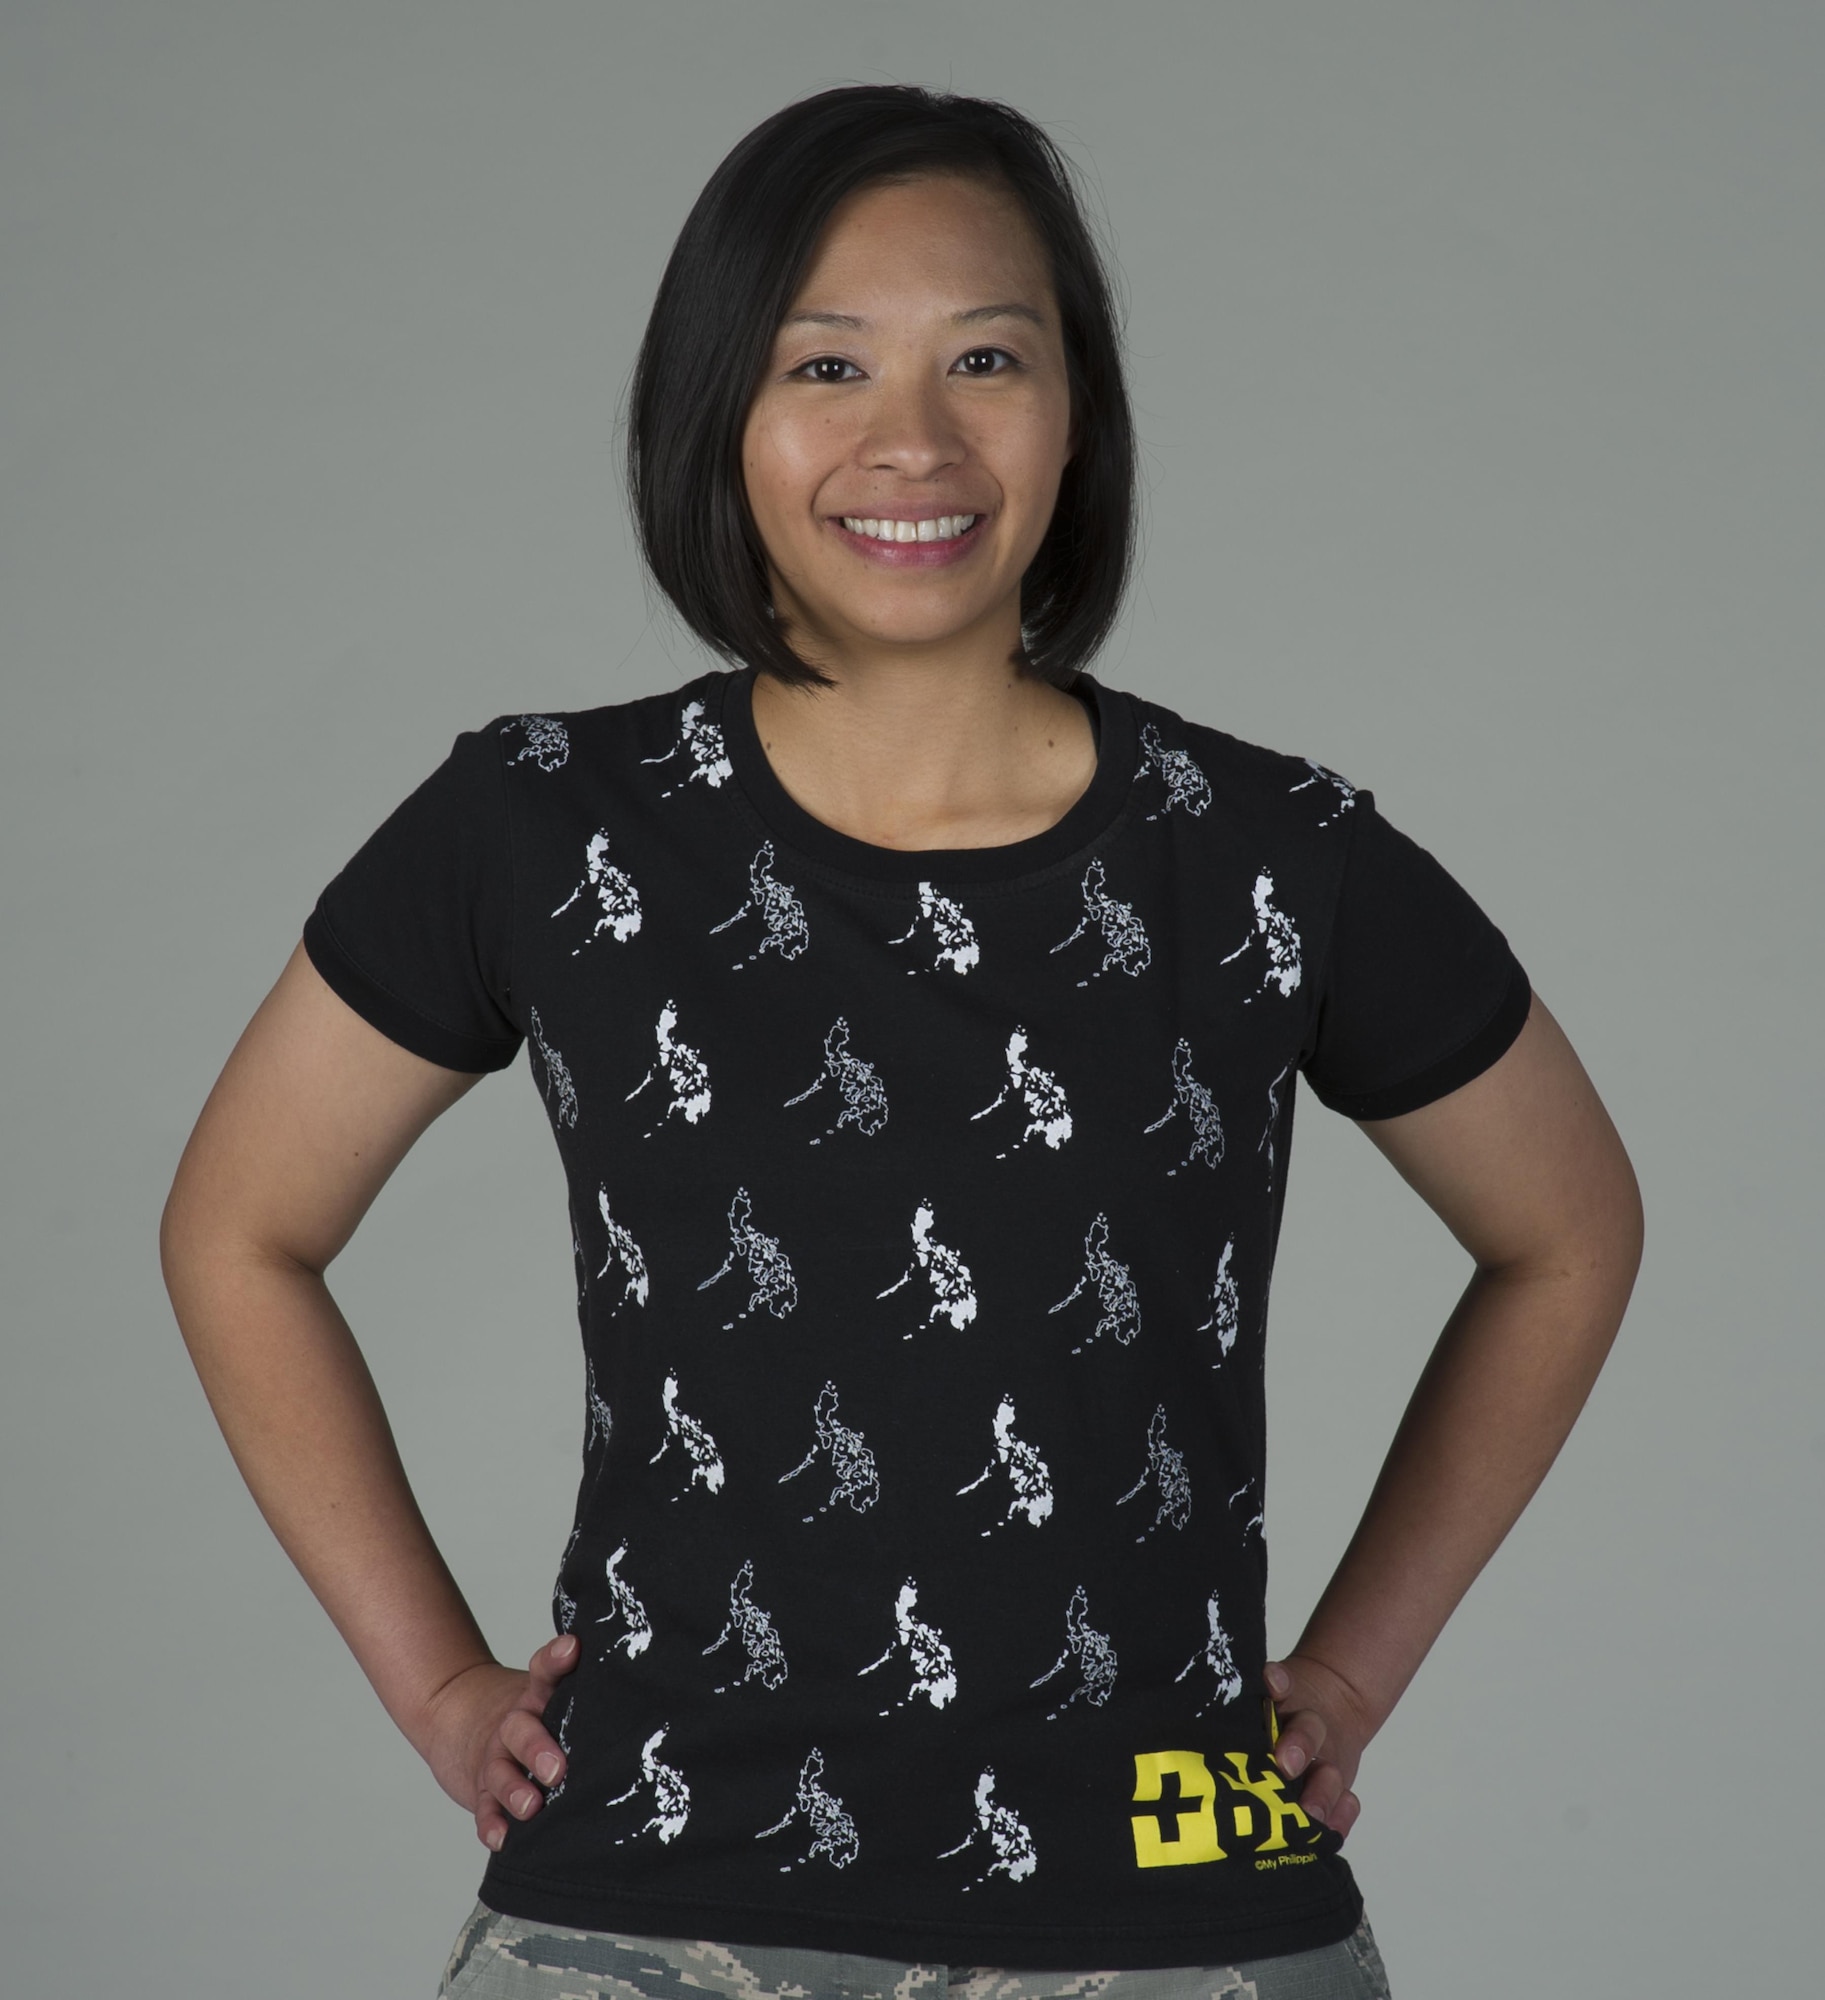 Staff Sgt. Jael Thomas, 60th Comptroller Squadron, poses for a photo June 9, 2017 at Travis Air Force Base, Calif., while wearing a shirt featuring images of the Philippines, her home country. Thomas joined the Air Force in October 2010. As a member of the 60th CPTS, she helps provide financial services to more than 12,000 people. (U.S. Air Force photo/ Heide Couch)